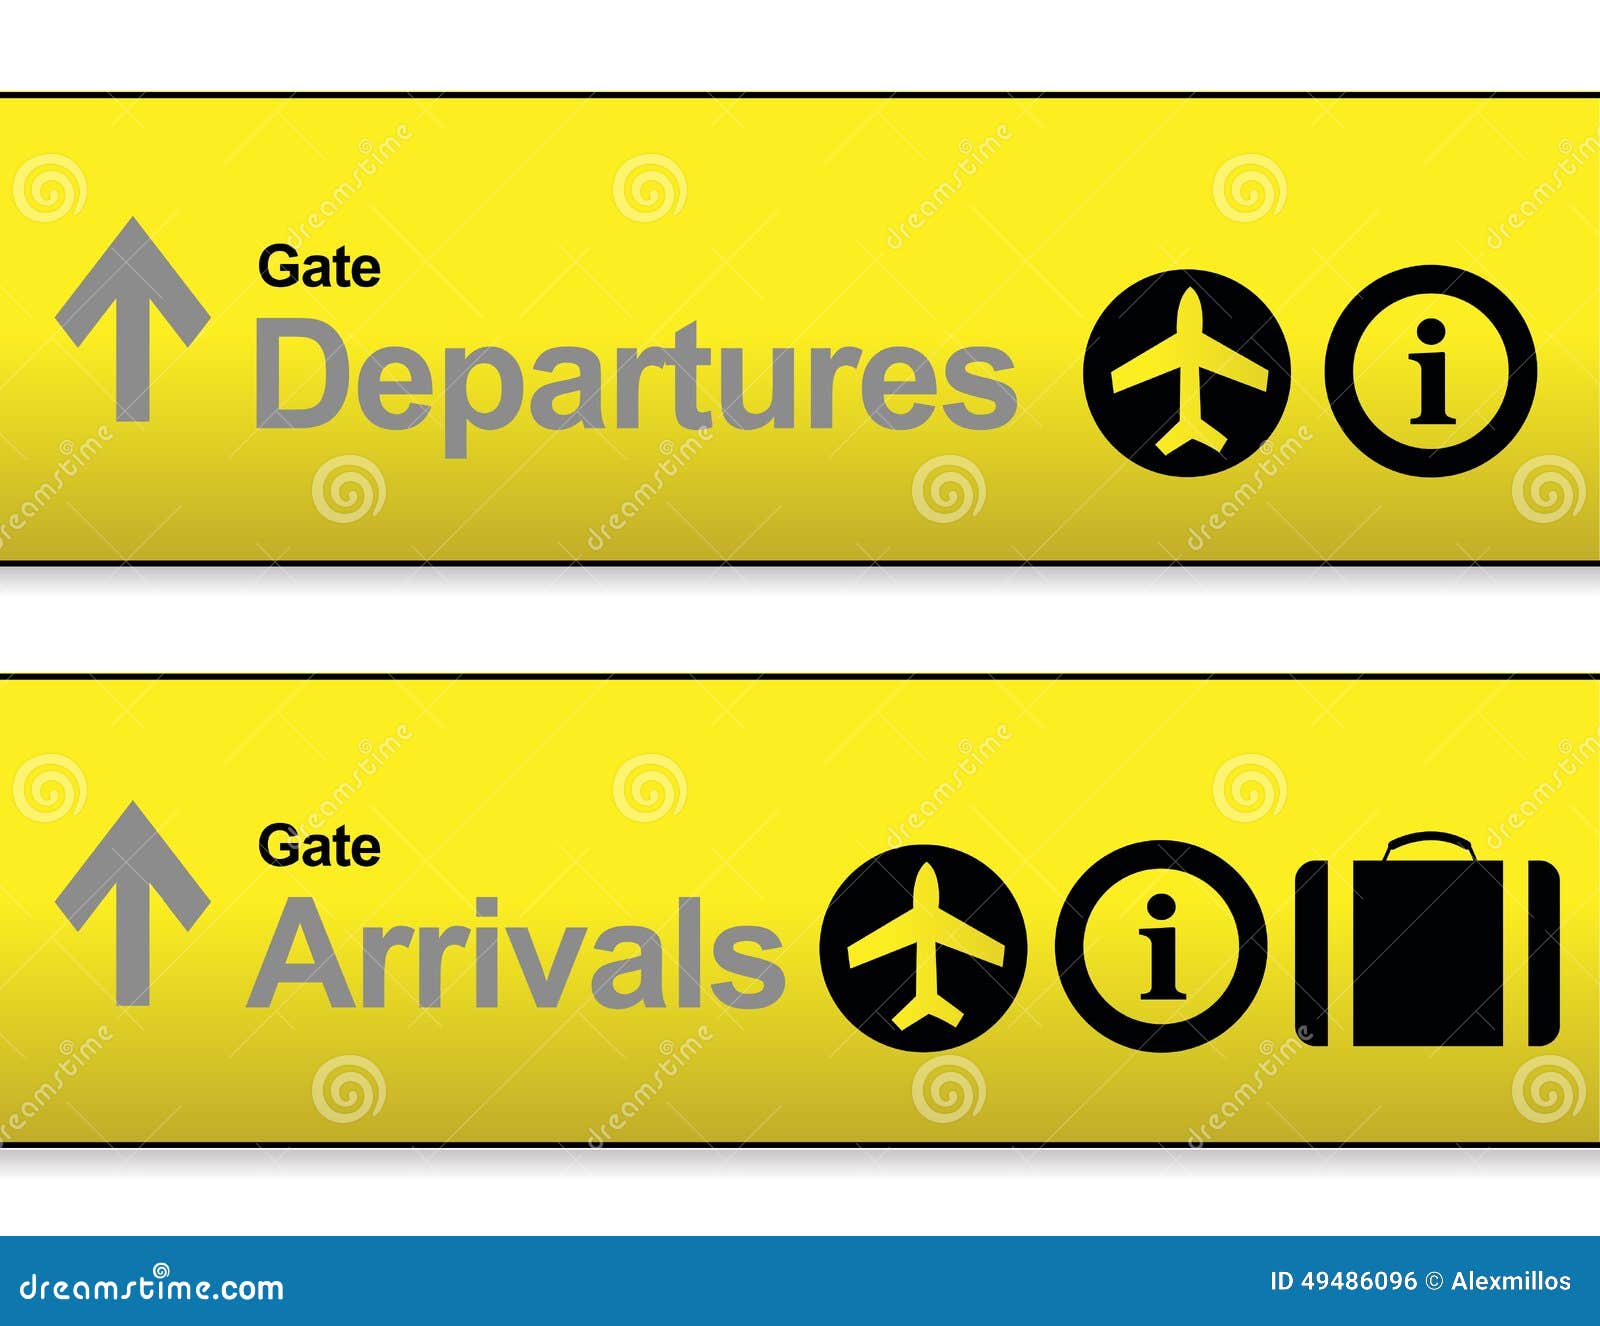 airport signs clipart - photo #34